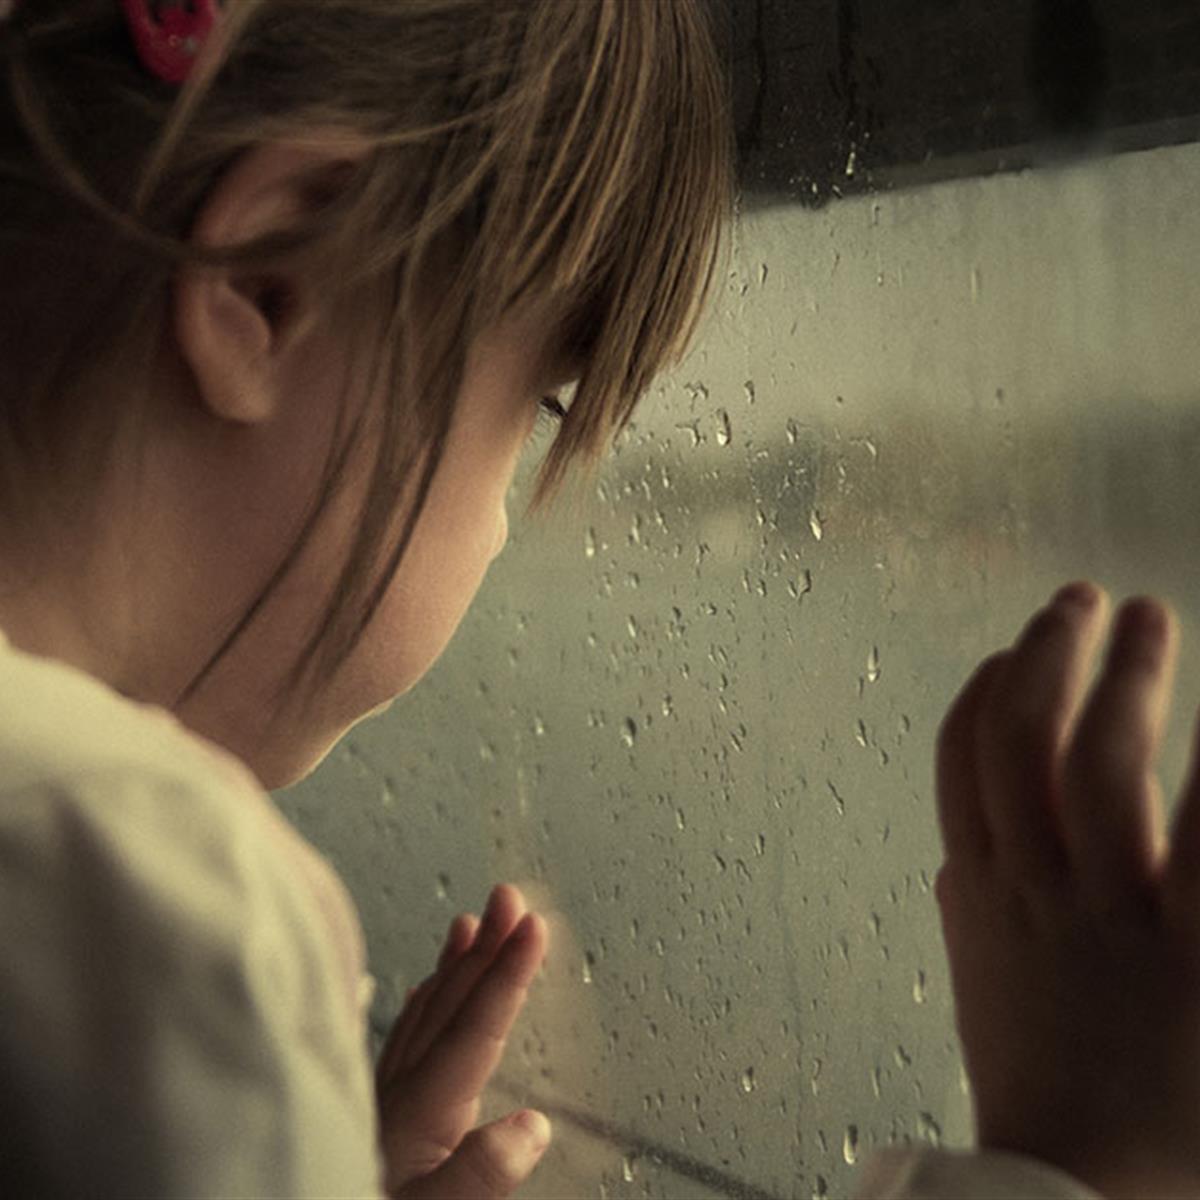 Child Abuse and Neglect: What Parents Should Know - HealthyChildren.org